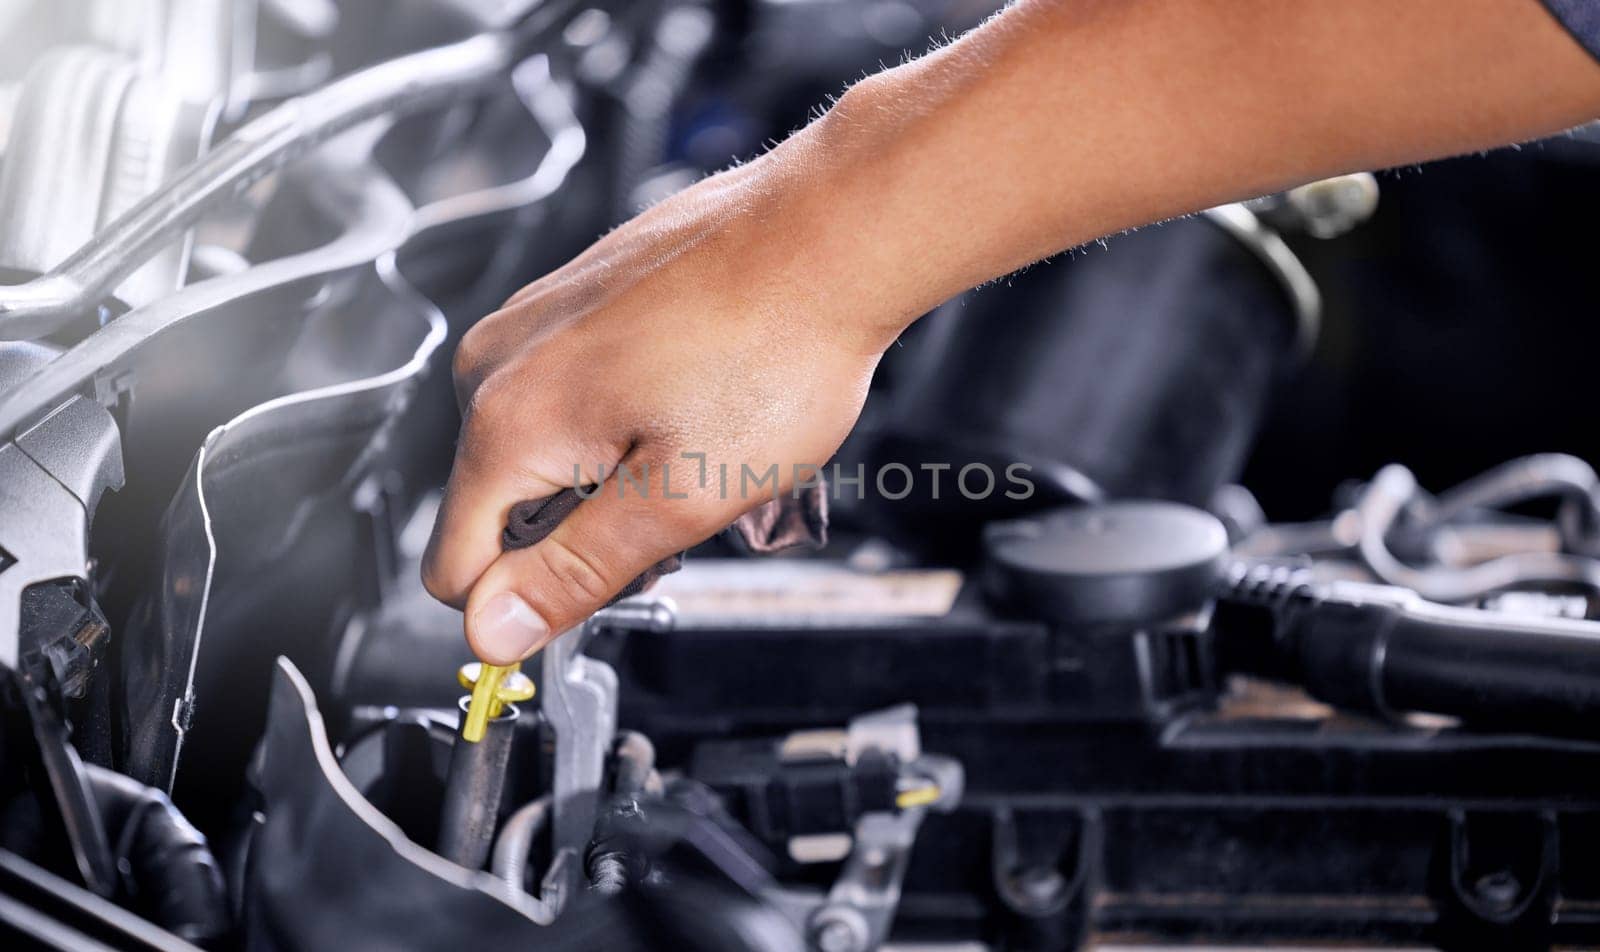 Engineering, repair and mechanic working on a car, doing a service and check for problem with the engine at a workshop. Hands of a transportation technician doing maintenance on a van or vehicle.